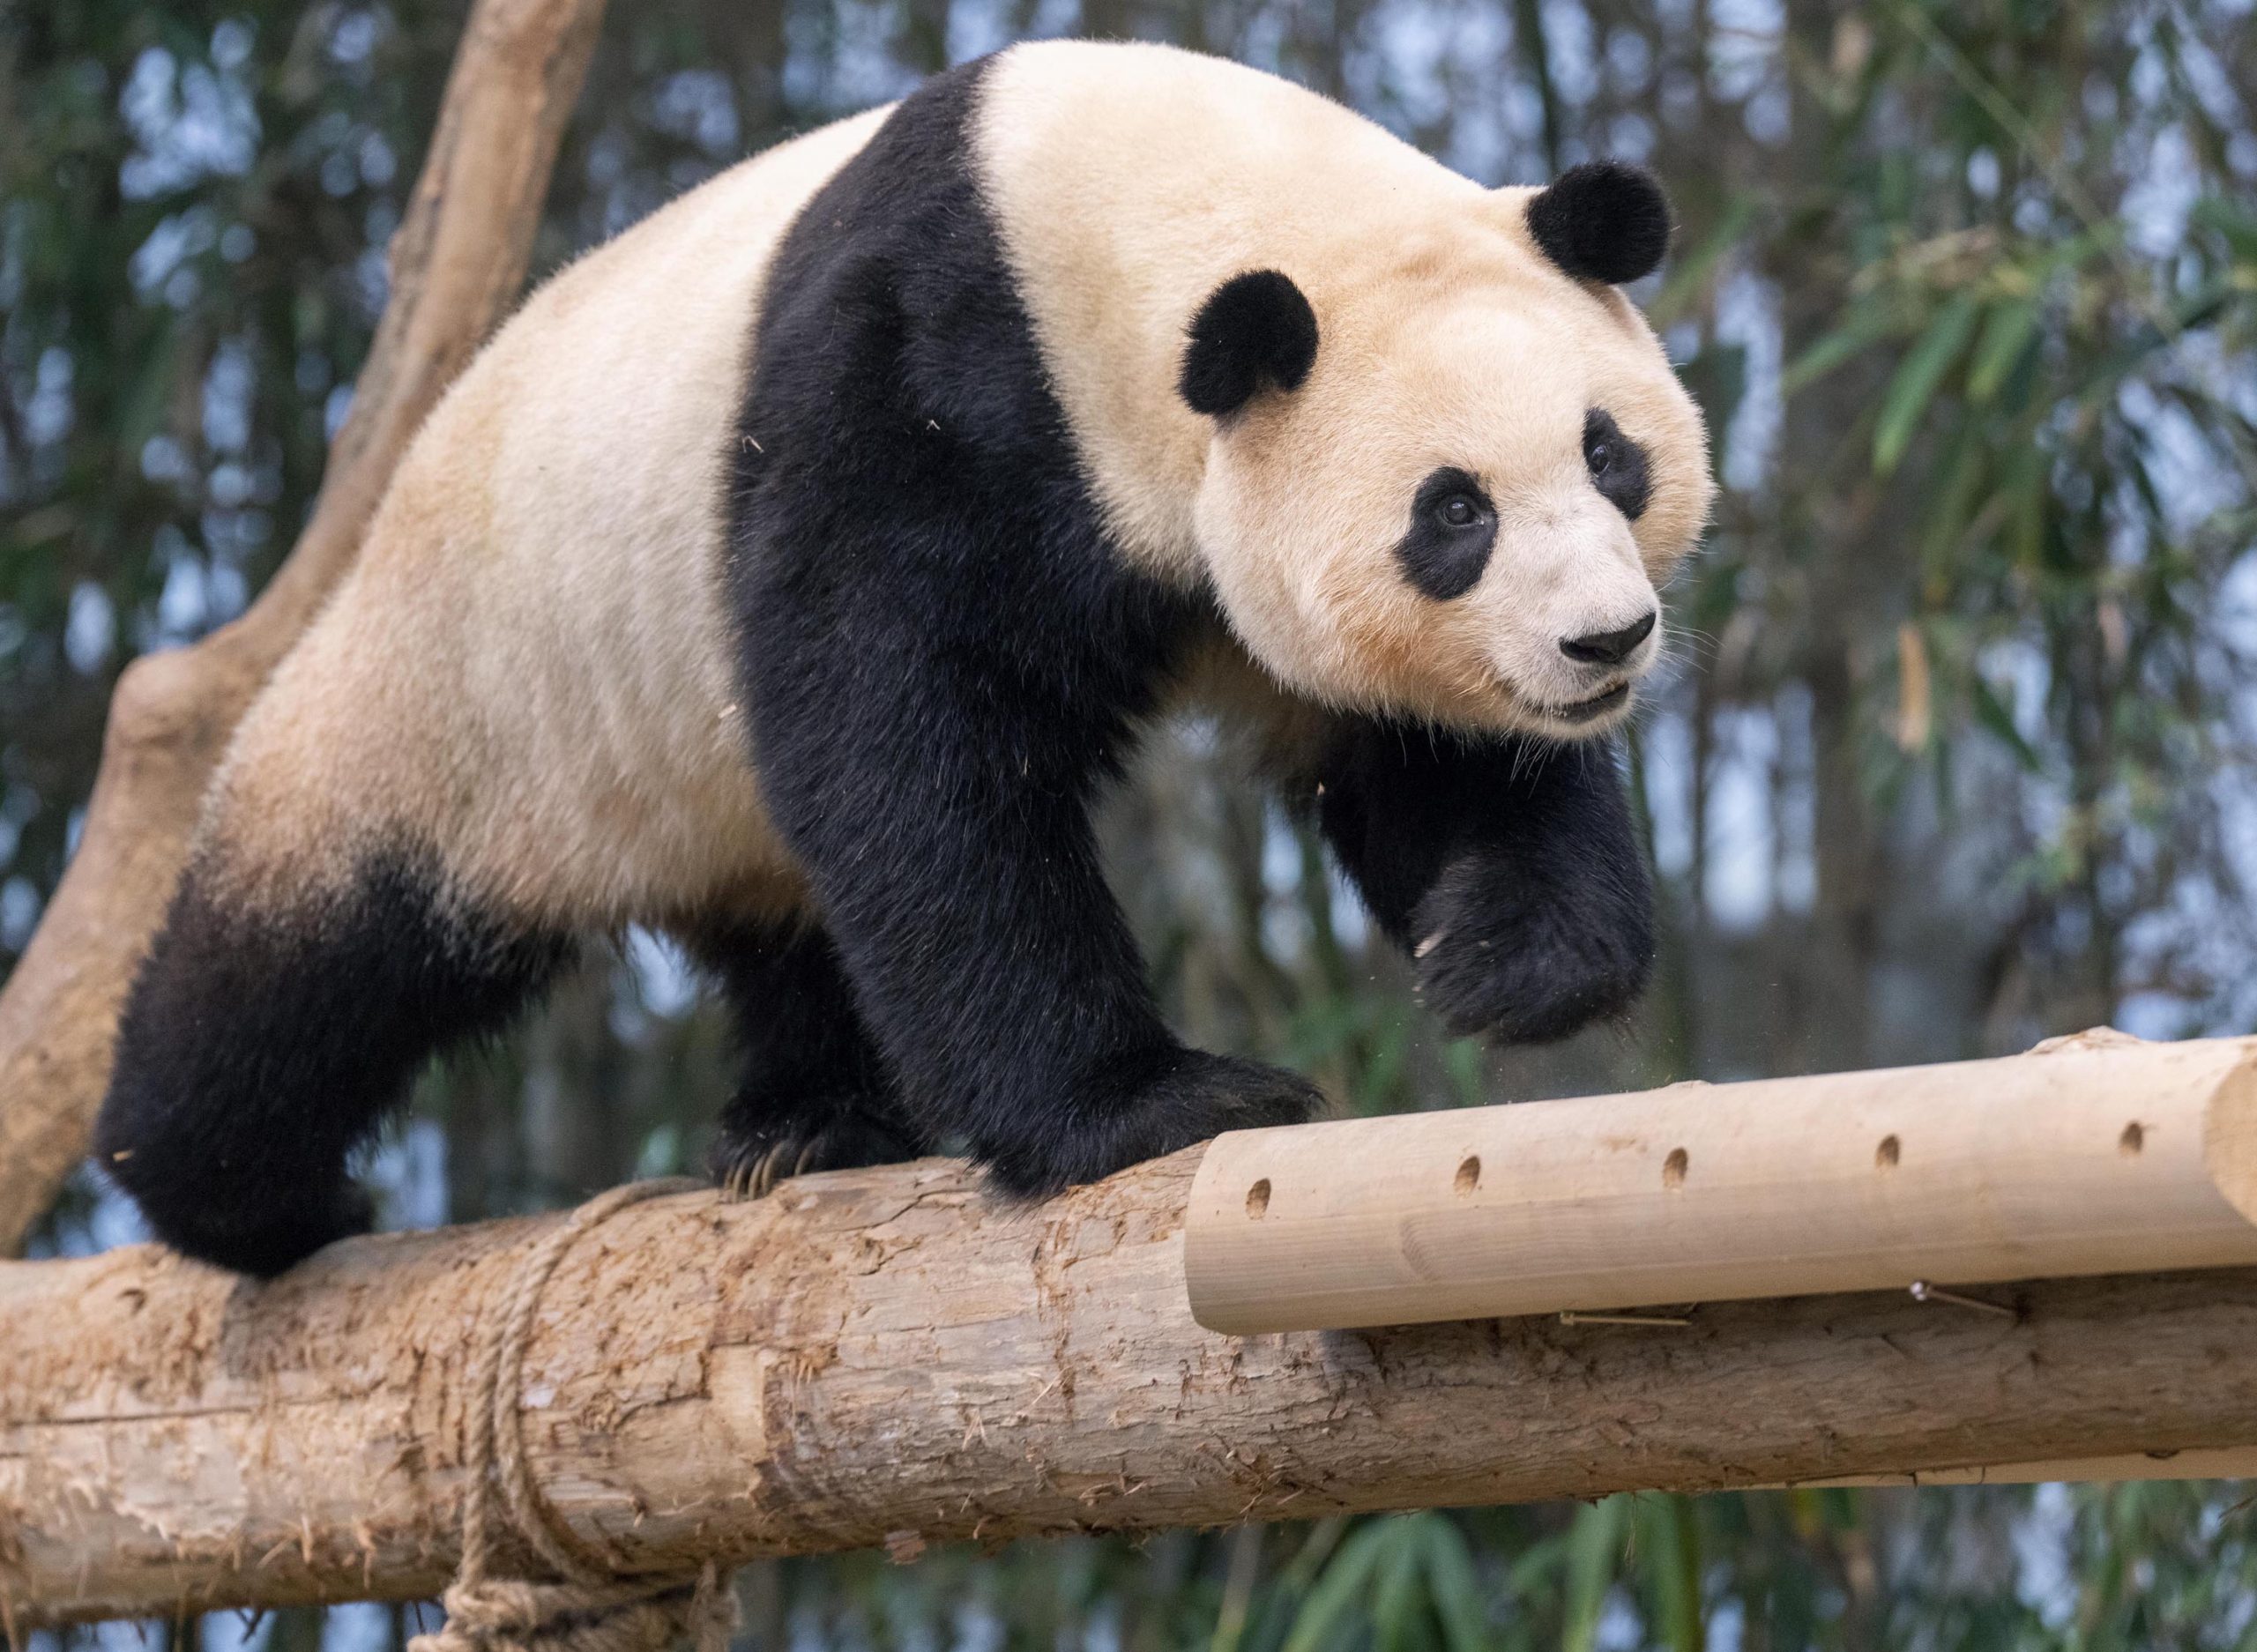 Fu Bao the giant panda will move to China in April.